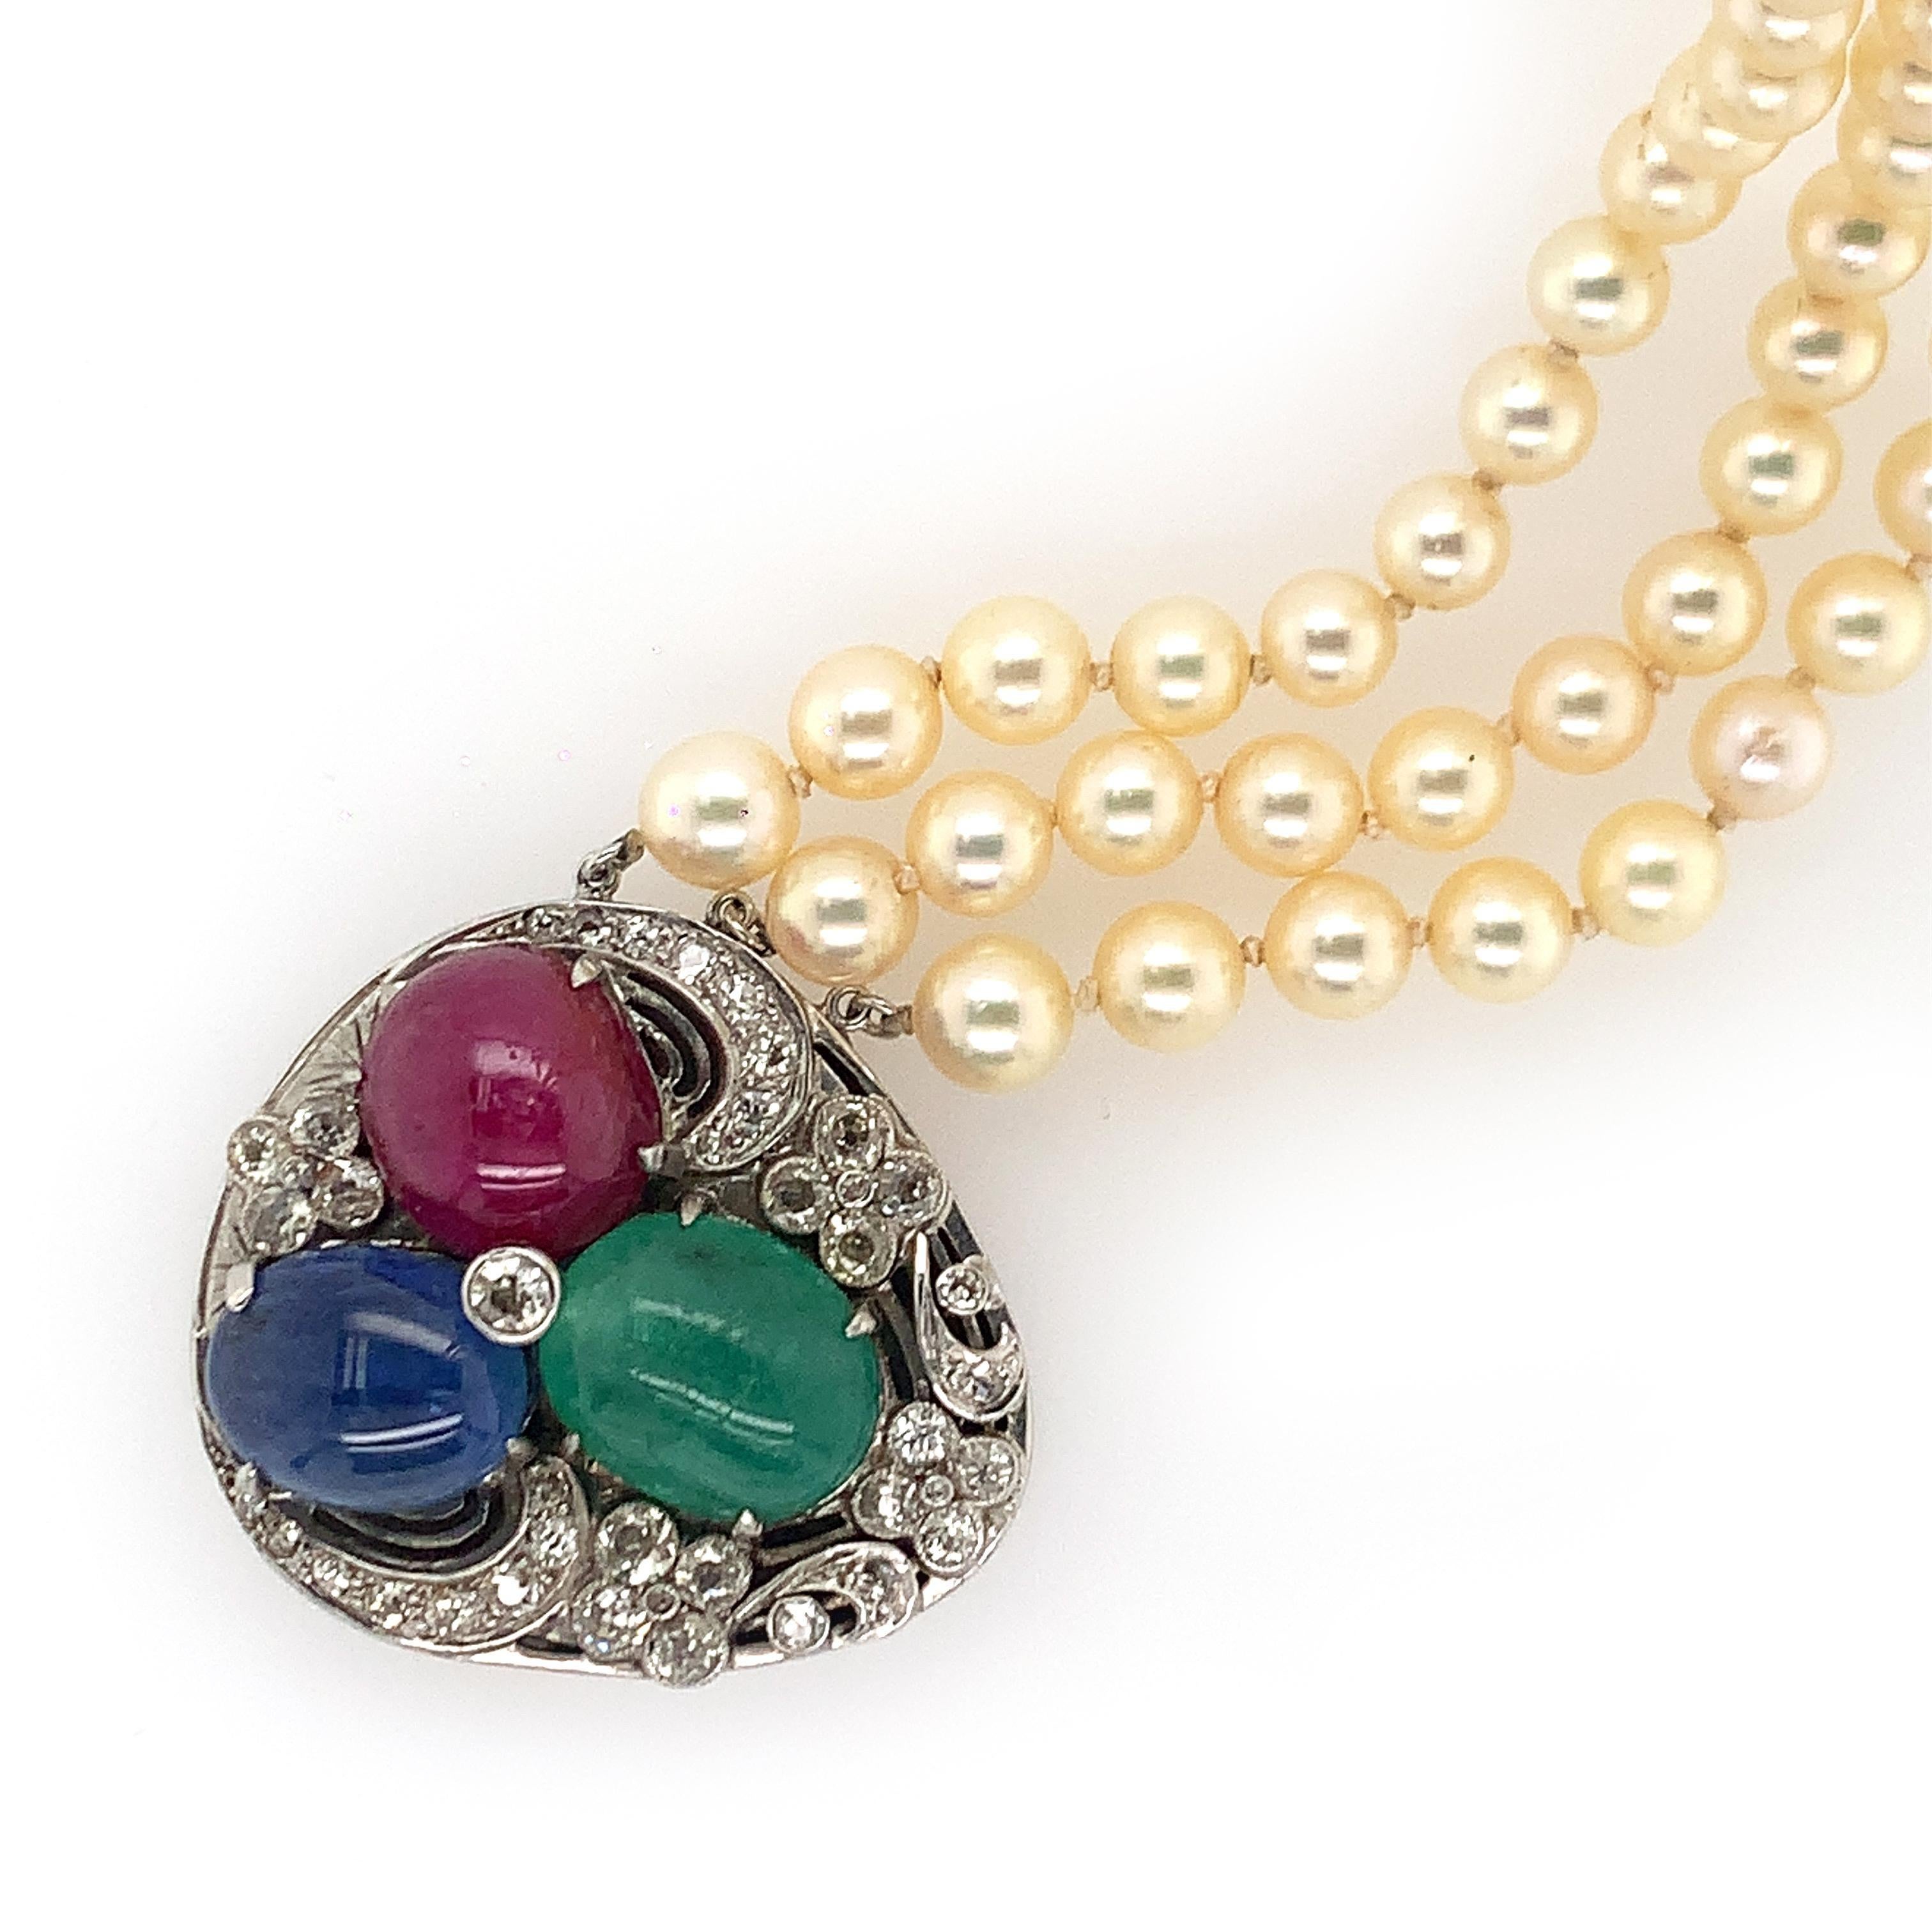 14K W/gold multi-colored stone diamond clasp/pendant pearl necklace. Old mine, old European cut diamonds weighing approx. 2.6 cts, J-K VS-SI, cab ruby weighing approx. 12.8 cts, cab emerald 9.85 cts, cab sapphire 11.50ct, signed SEAMAN 14K meausres